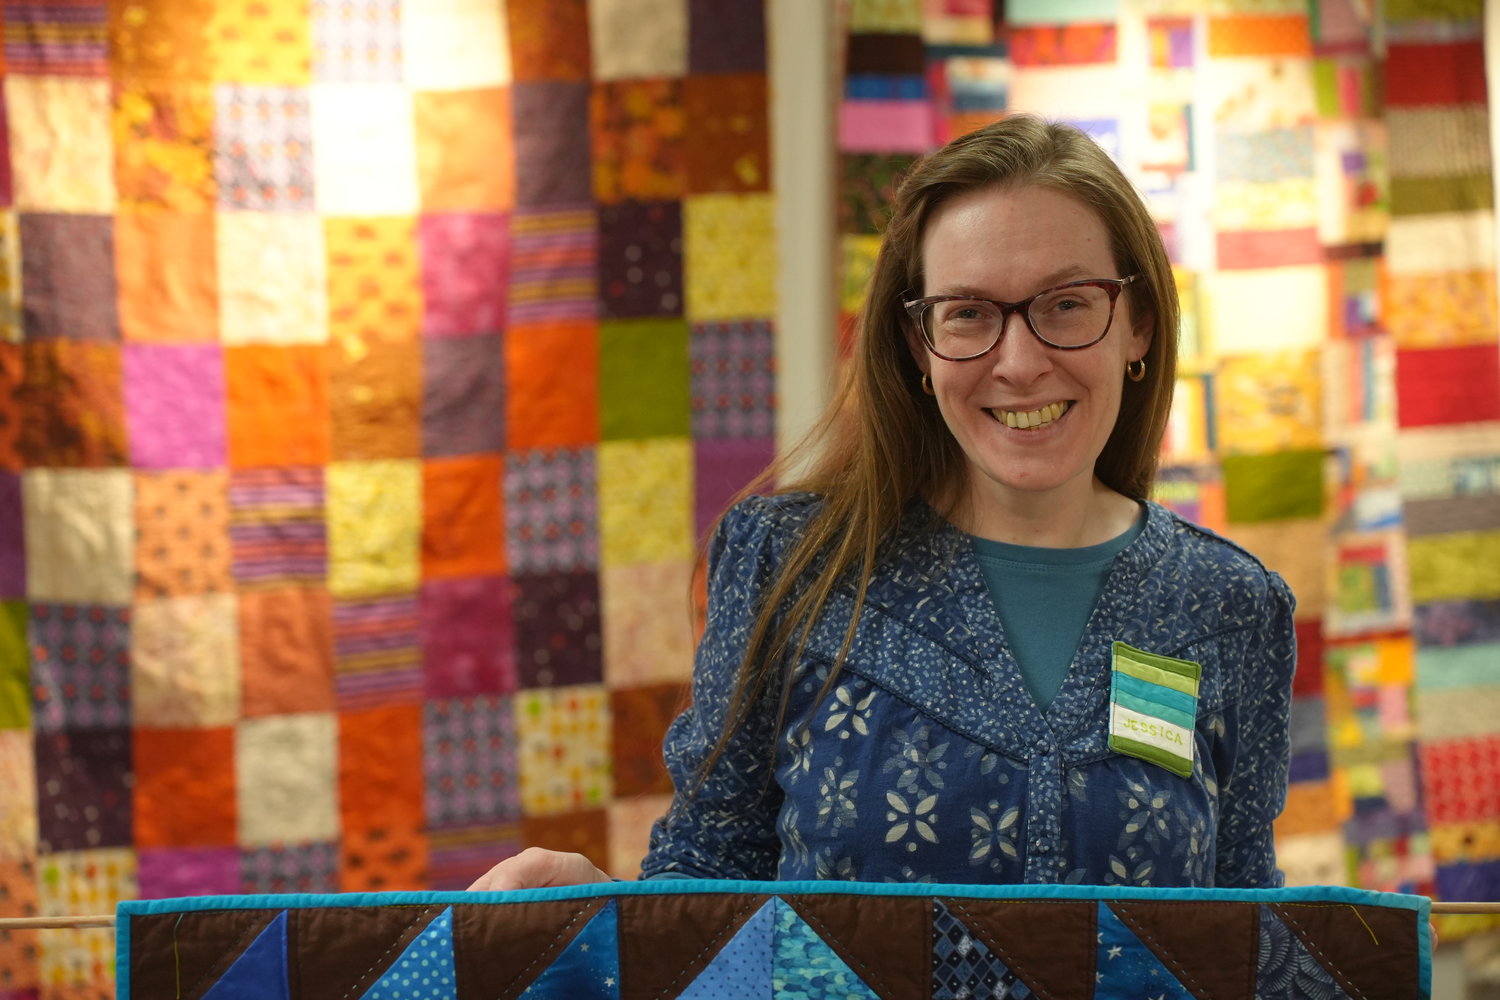 Jessica Alexandrakis, an accomplished quilter, had an opening ceremony for her show on exhibit at the Bellmore Memorial Library earlier this month.